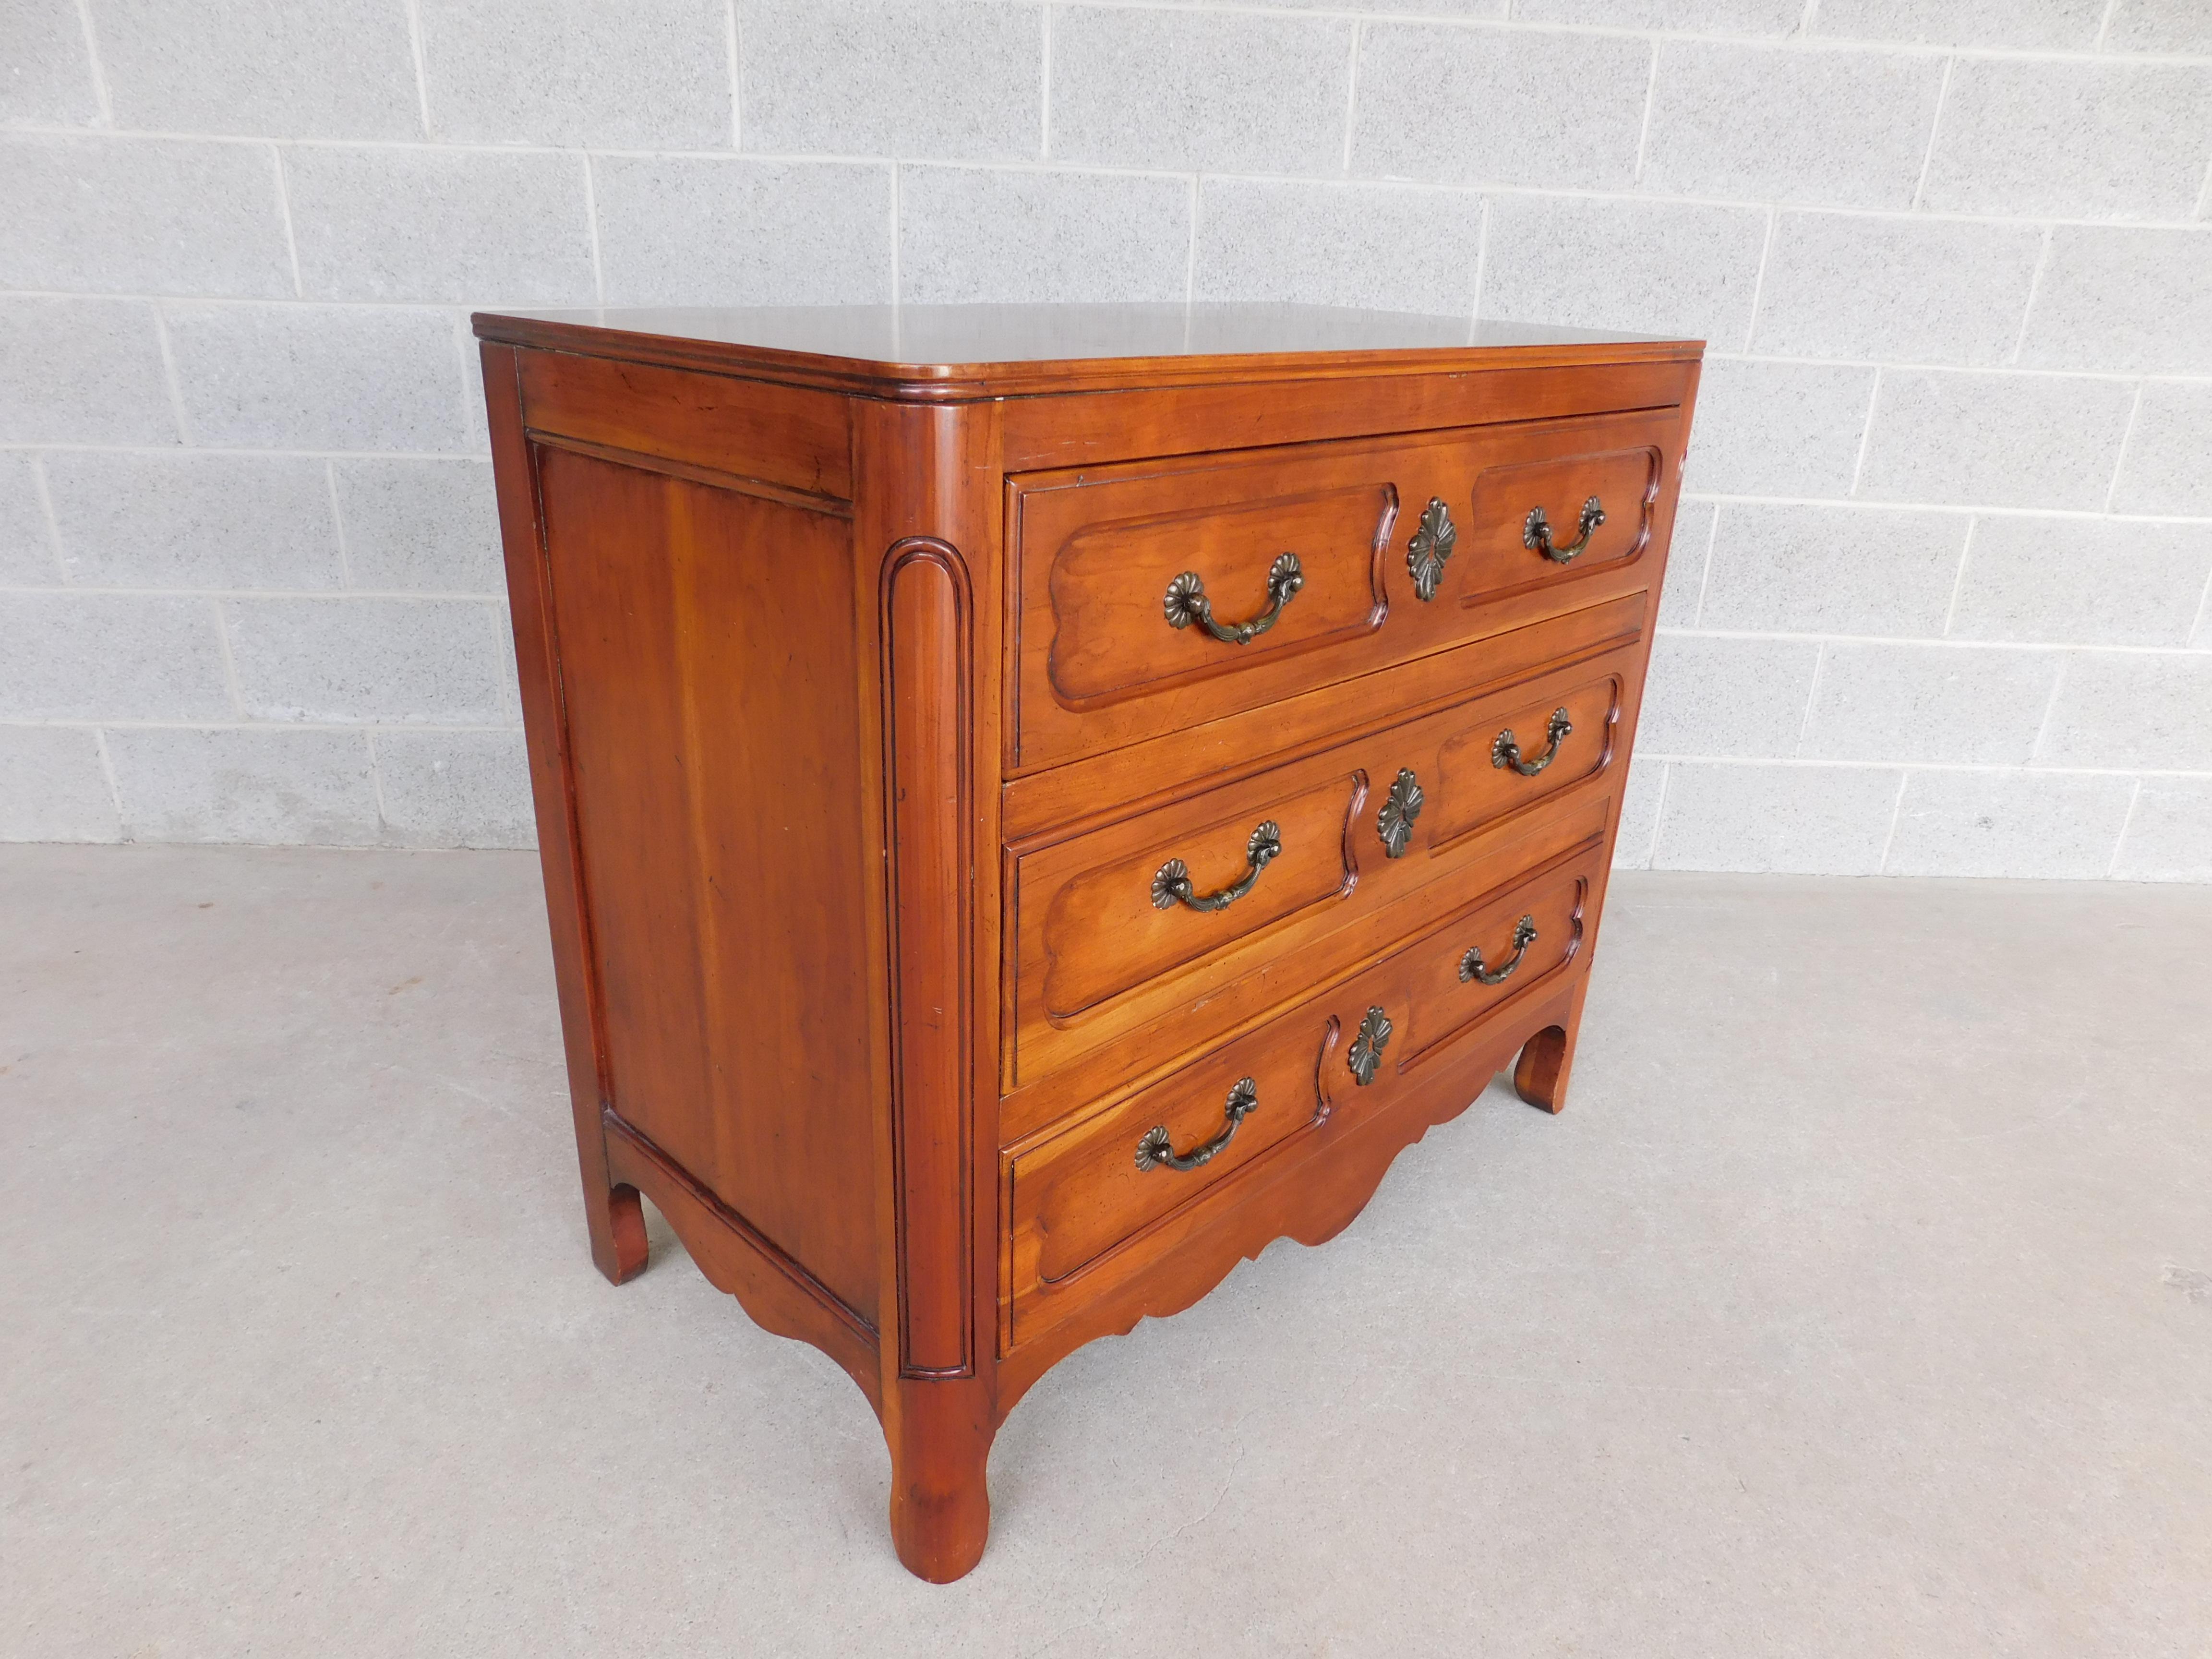 French Provincial John Widdicomb French Country Style 3 Drawer Commode